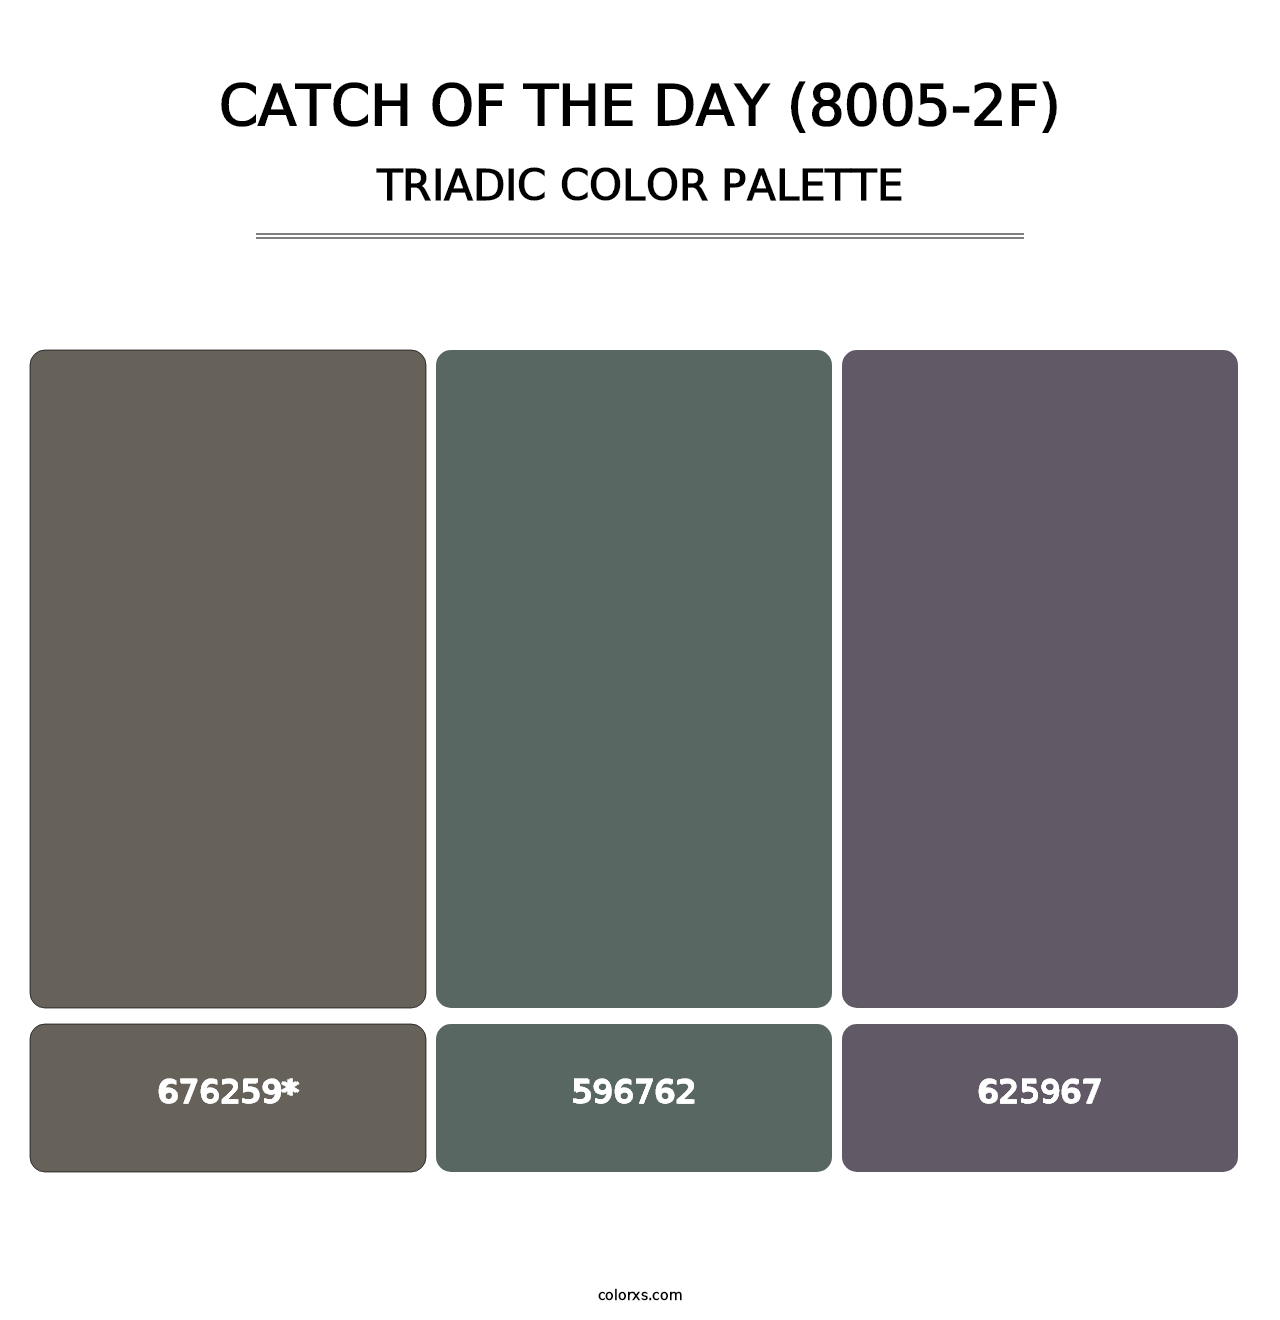 Catch of the Day (8005-2F) - Triadic Color Palette